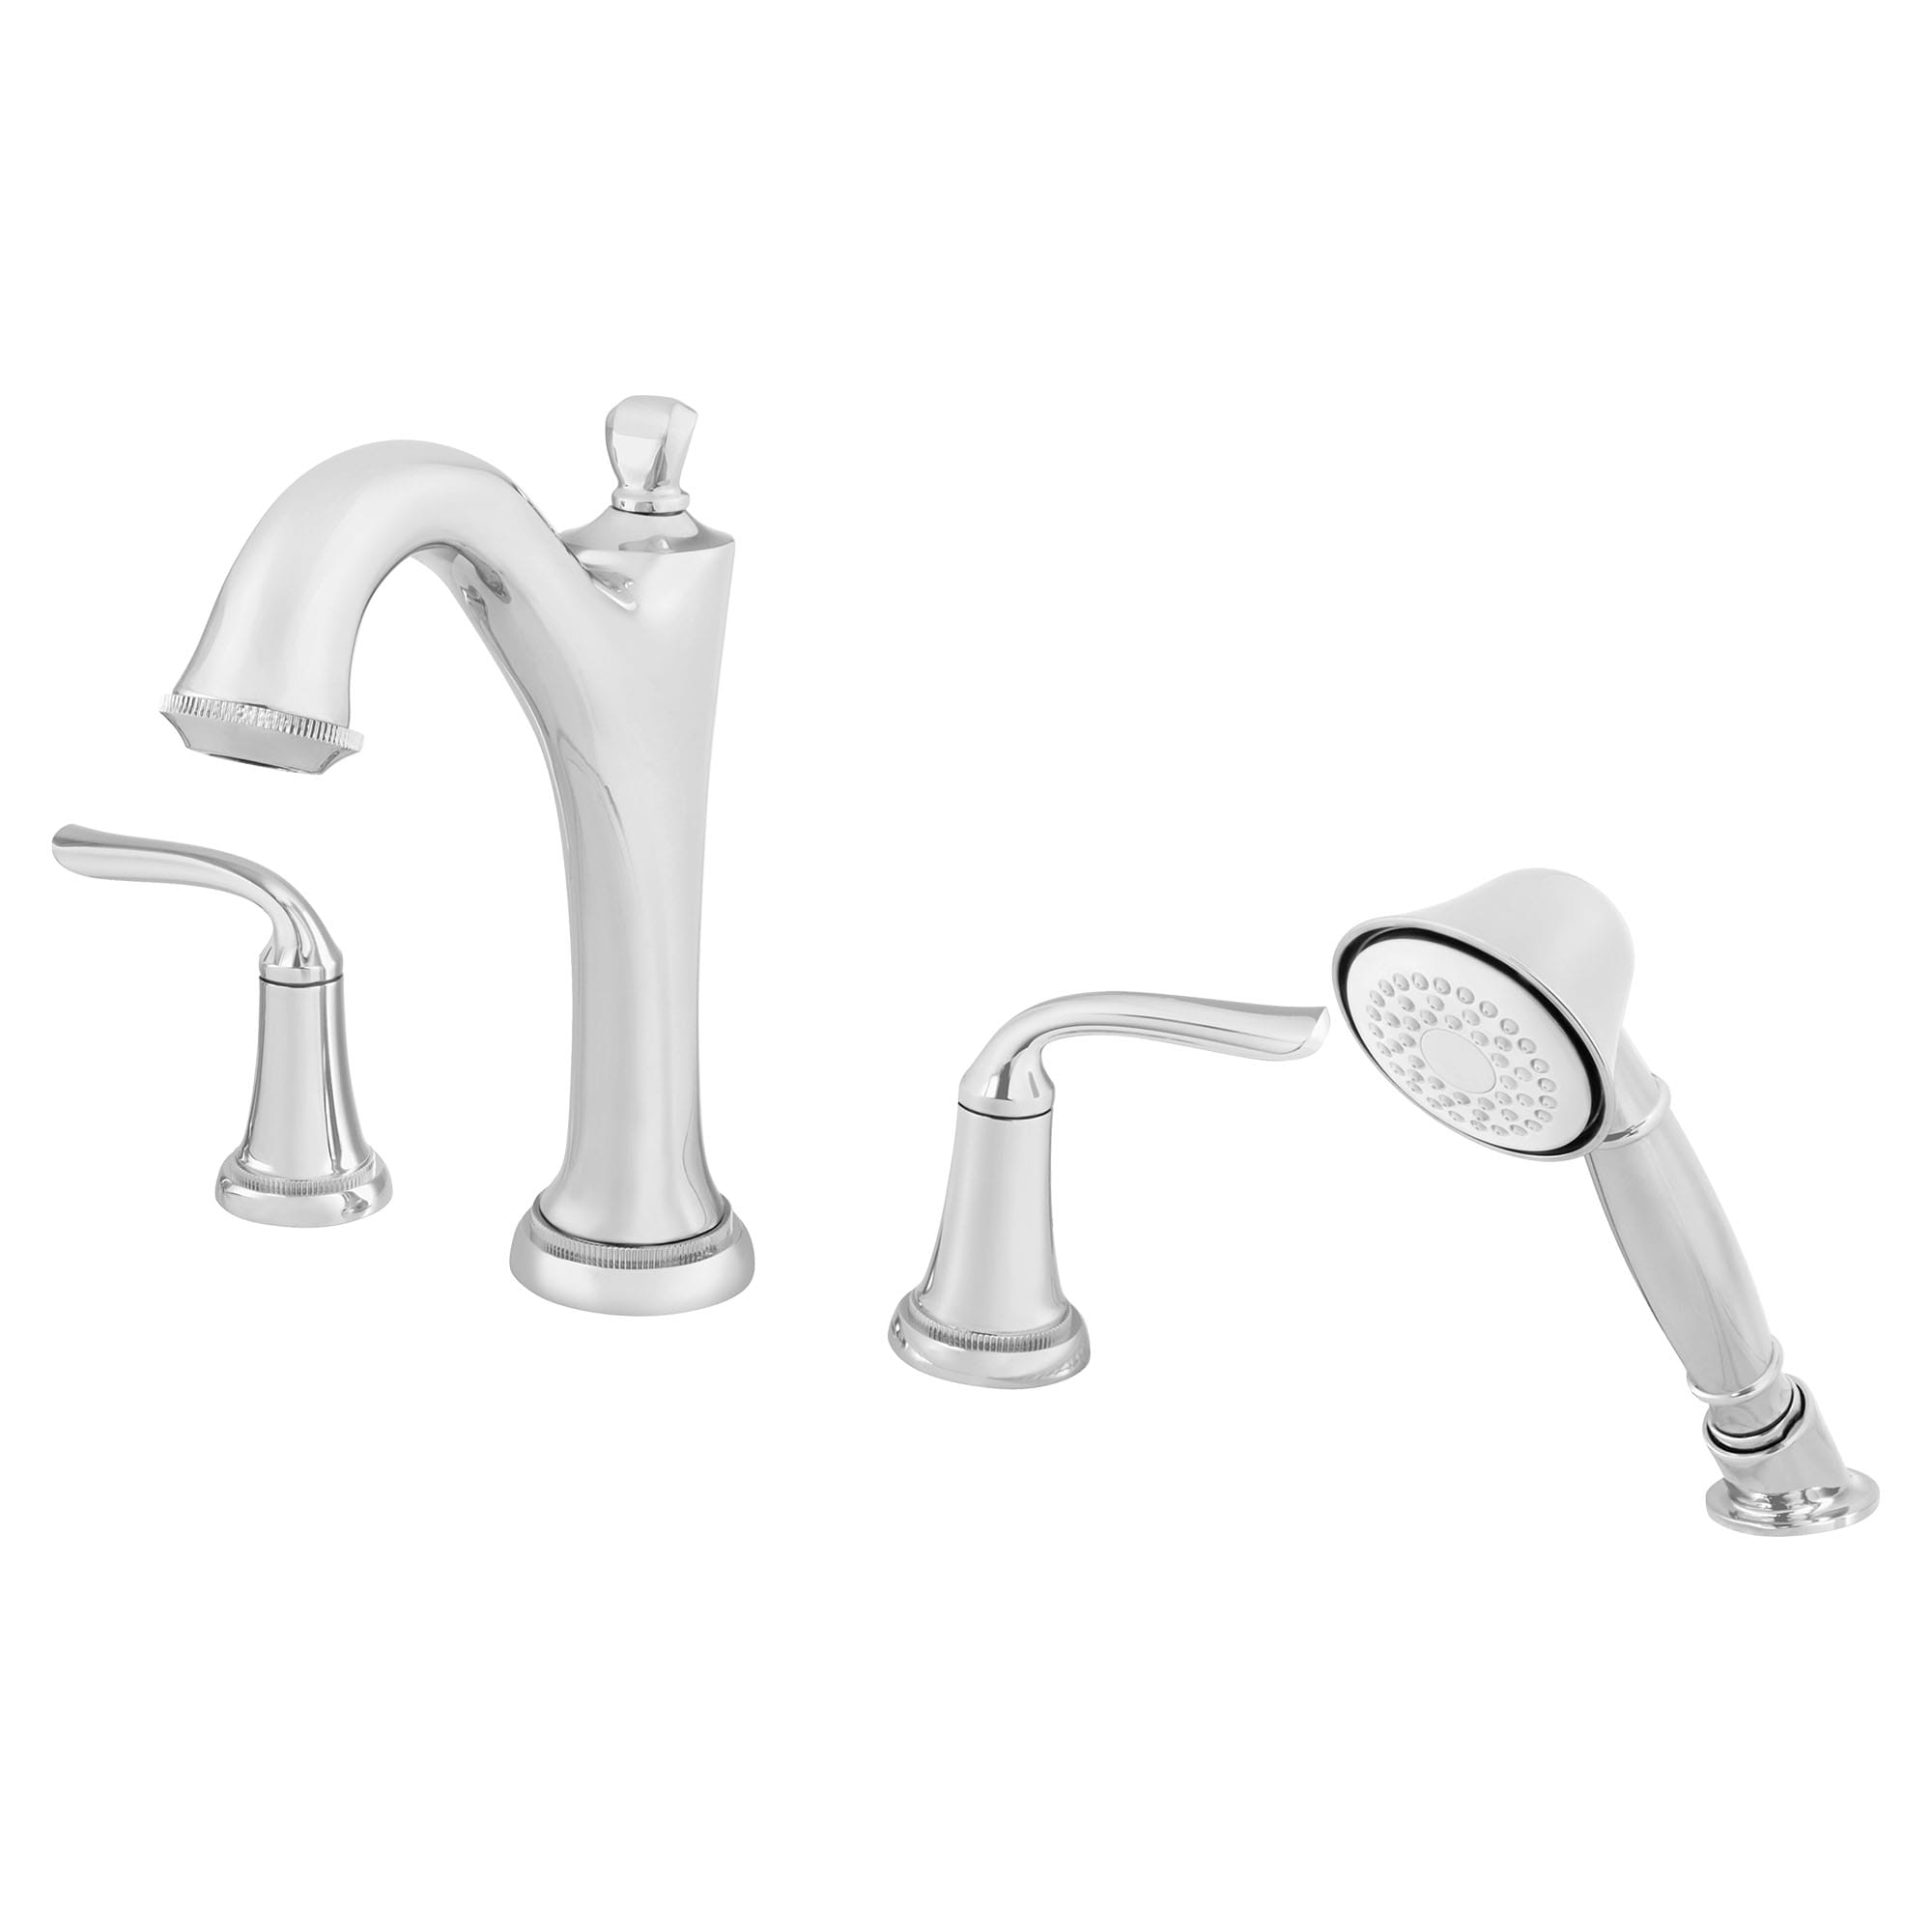 Patience Bathtub Faucet With Lever Handles and Personal Shower for Flash Rough In Valve CHROME